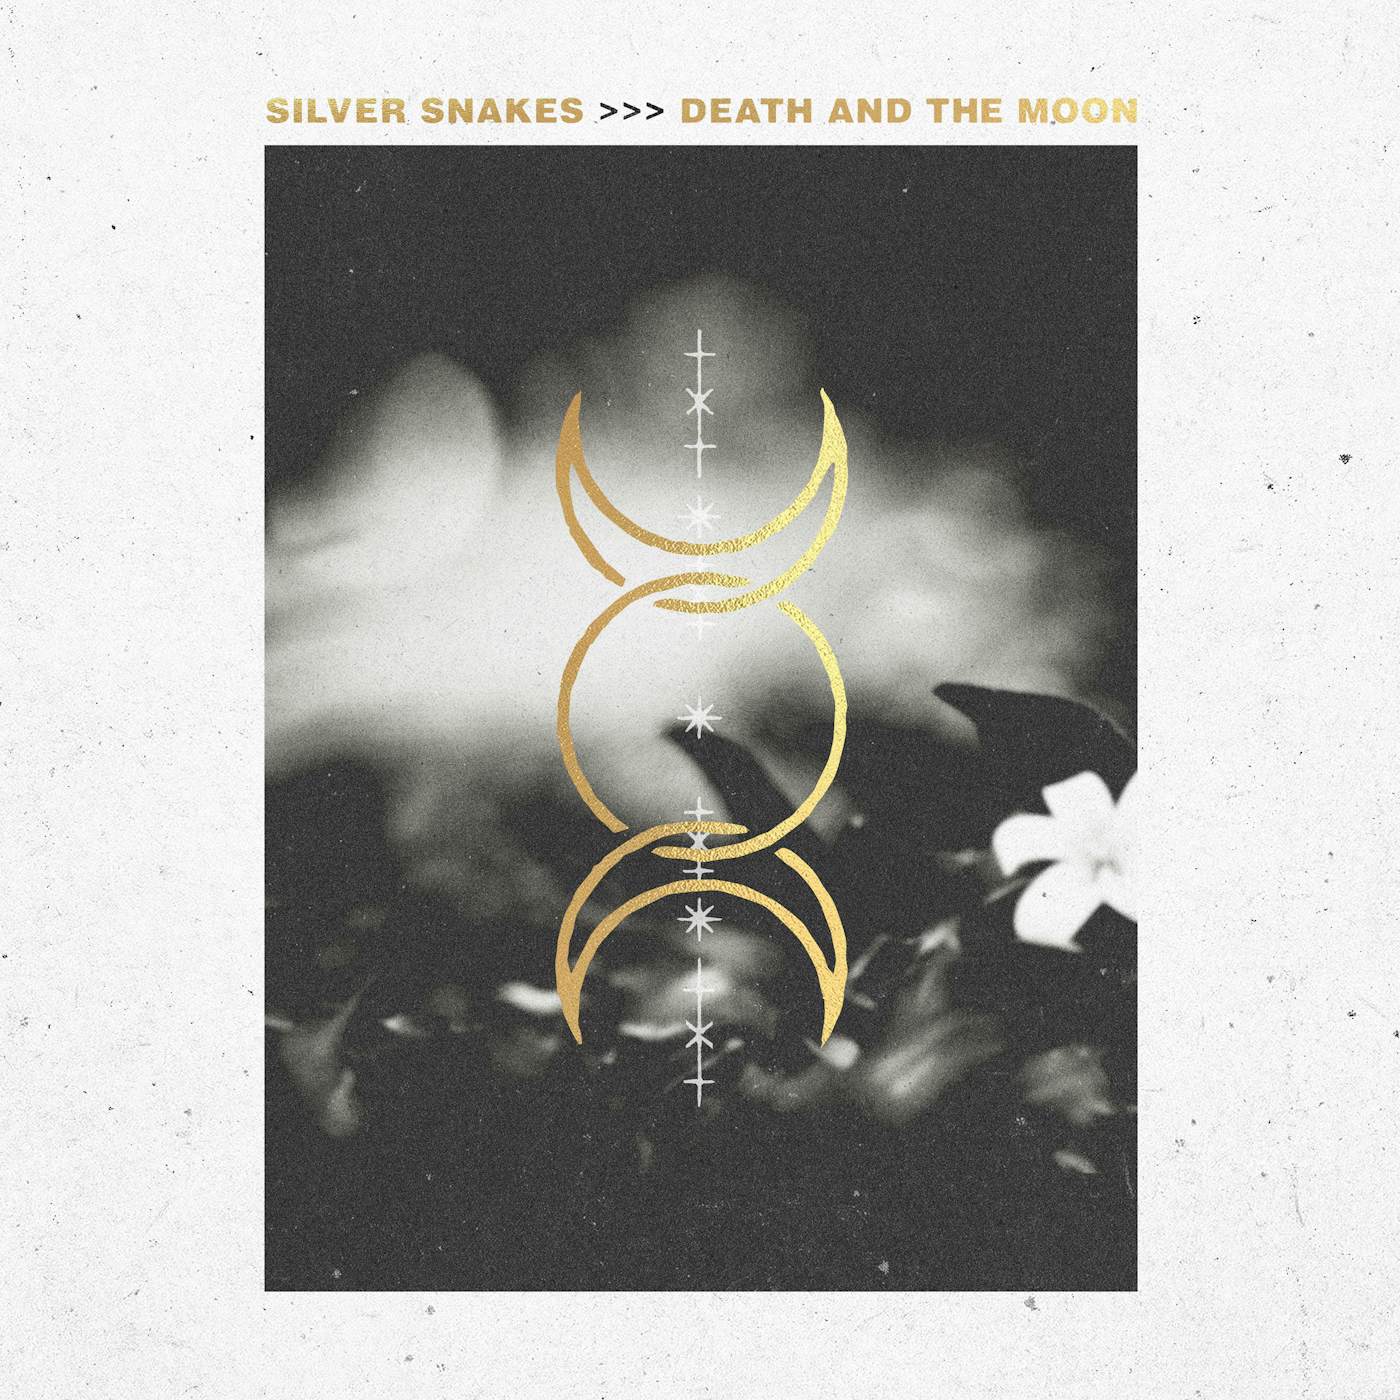 Silver Snakes DEATH AND THE MOON CD